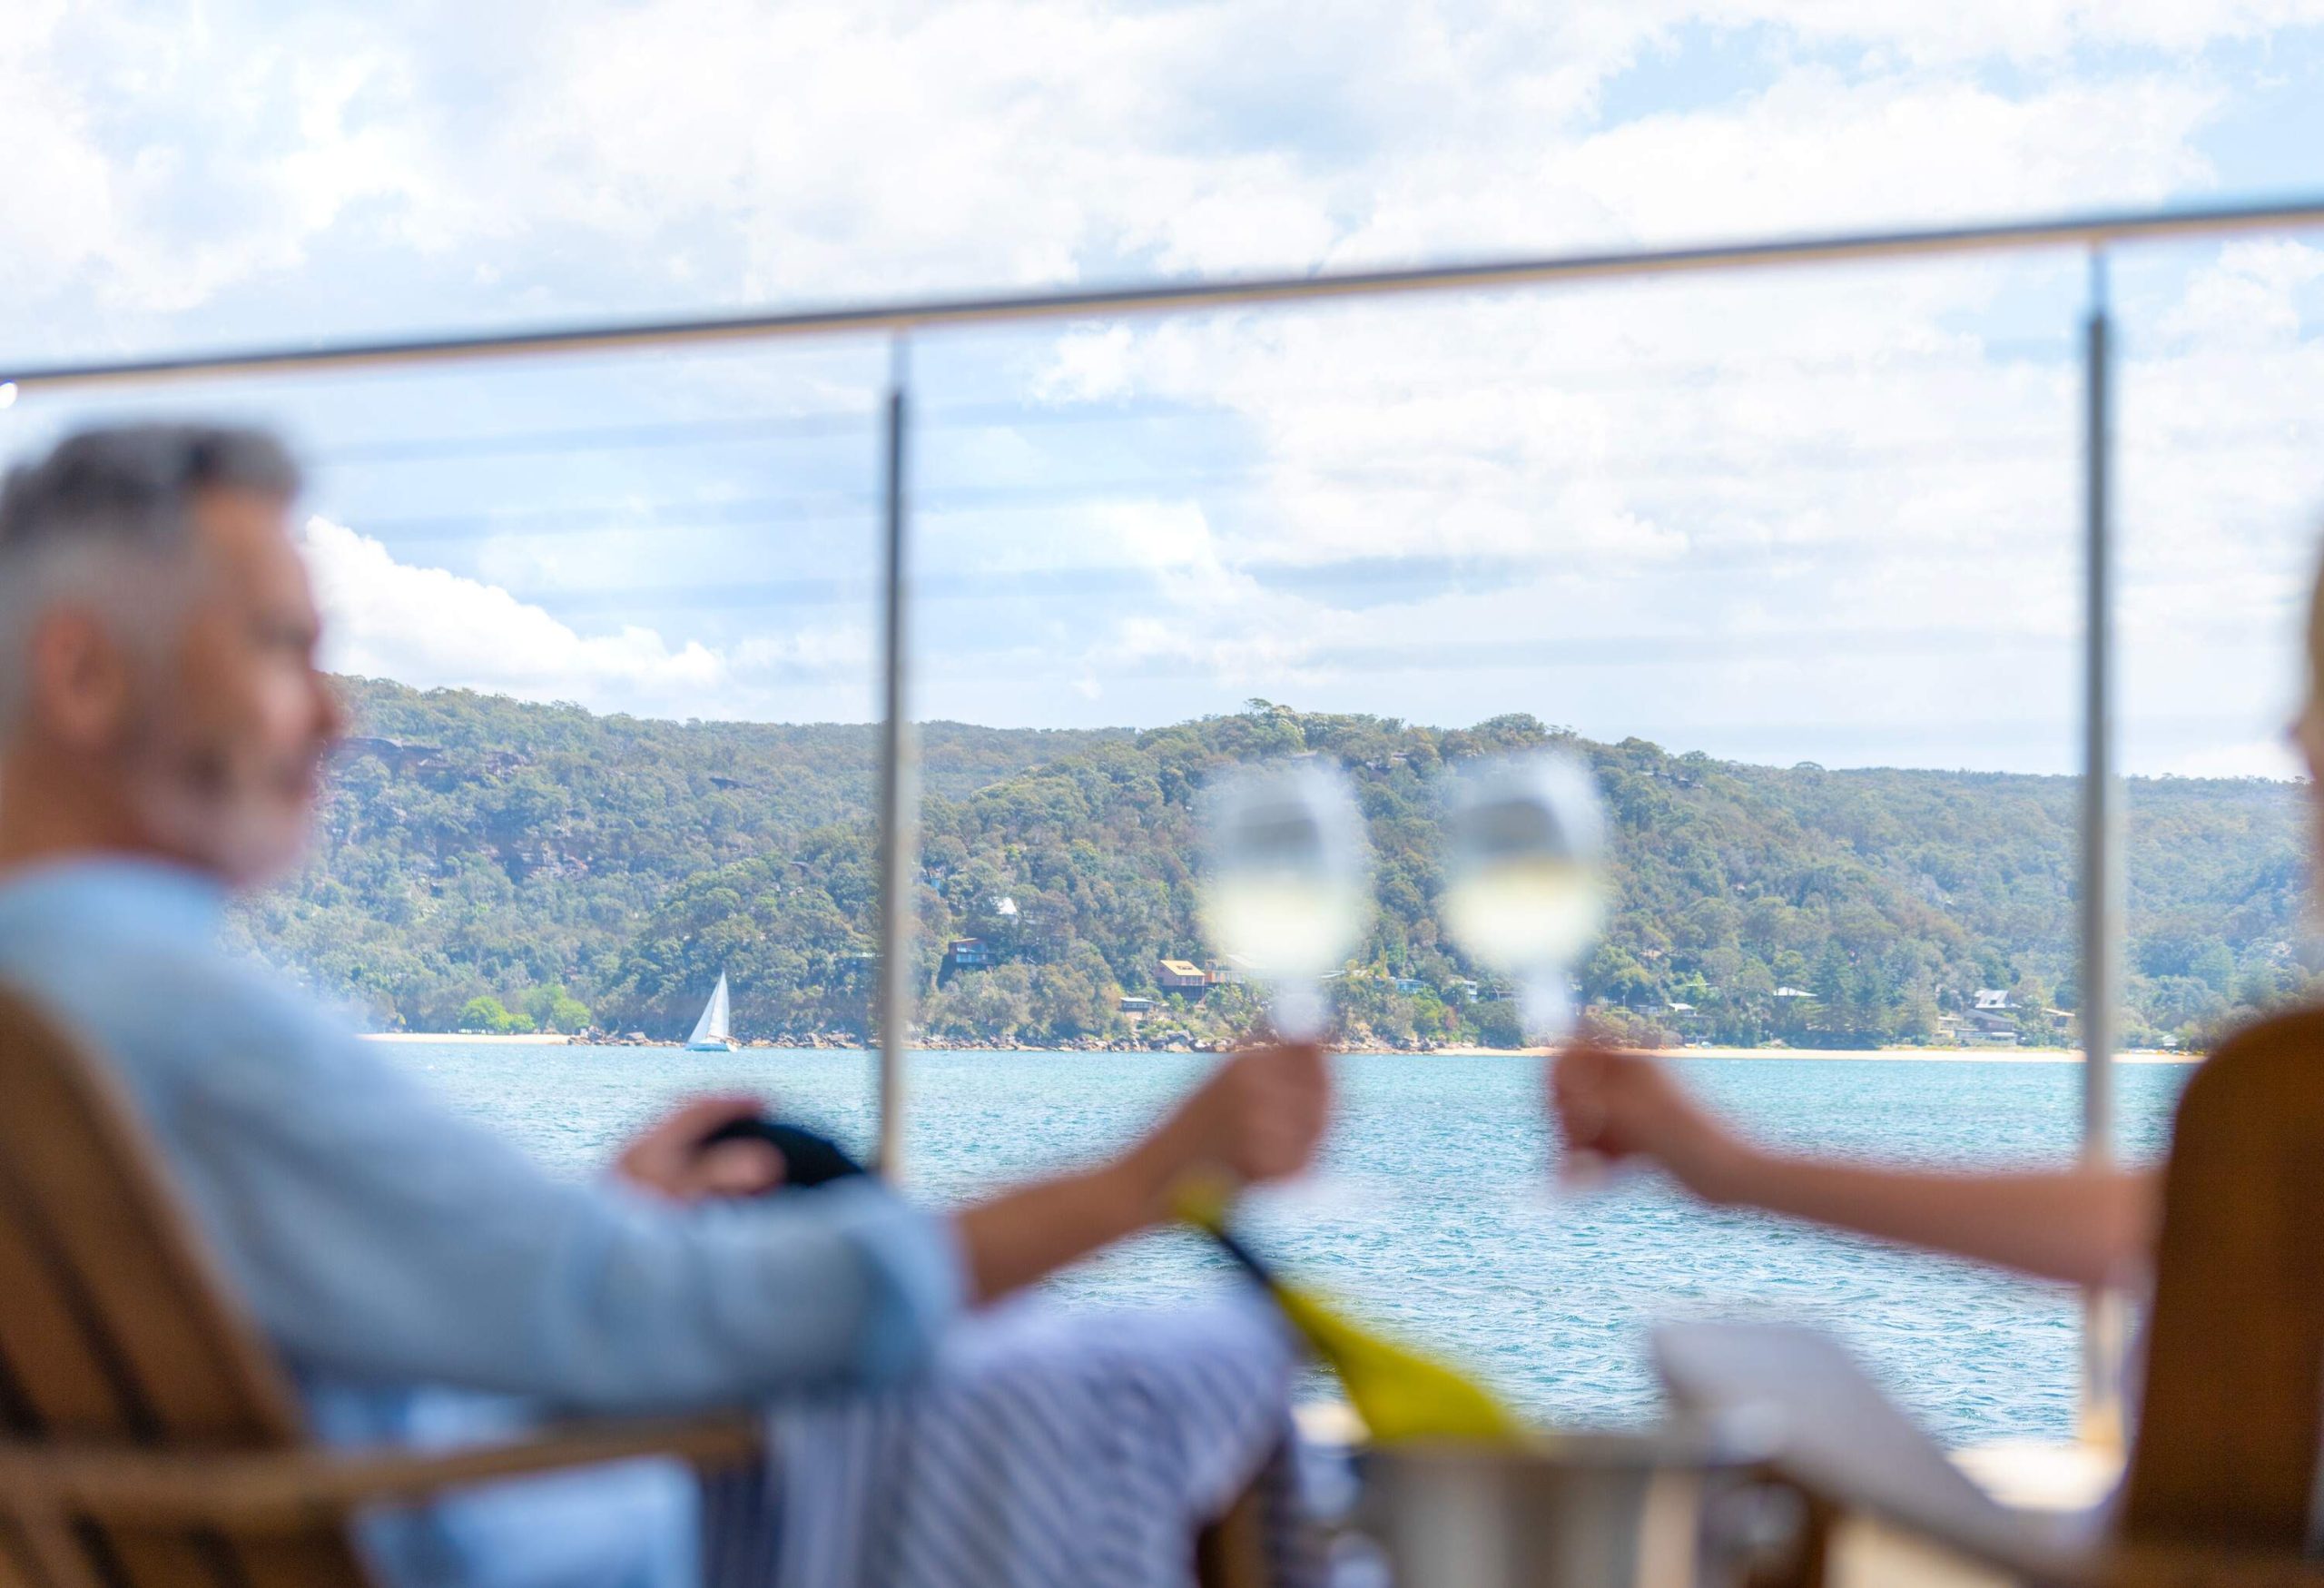 Mature couple drinking wine out on the deck. They are happy and smiling sitting in deck chairs. The sea is in the background. Focus on the background